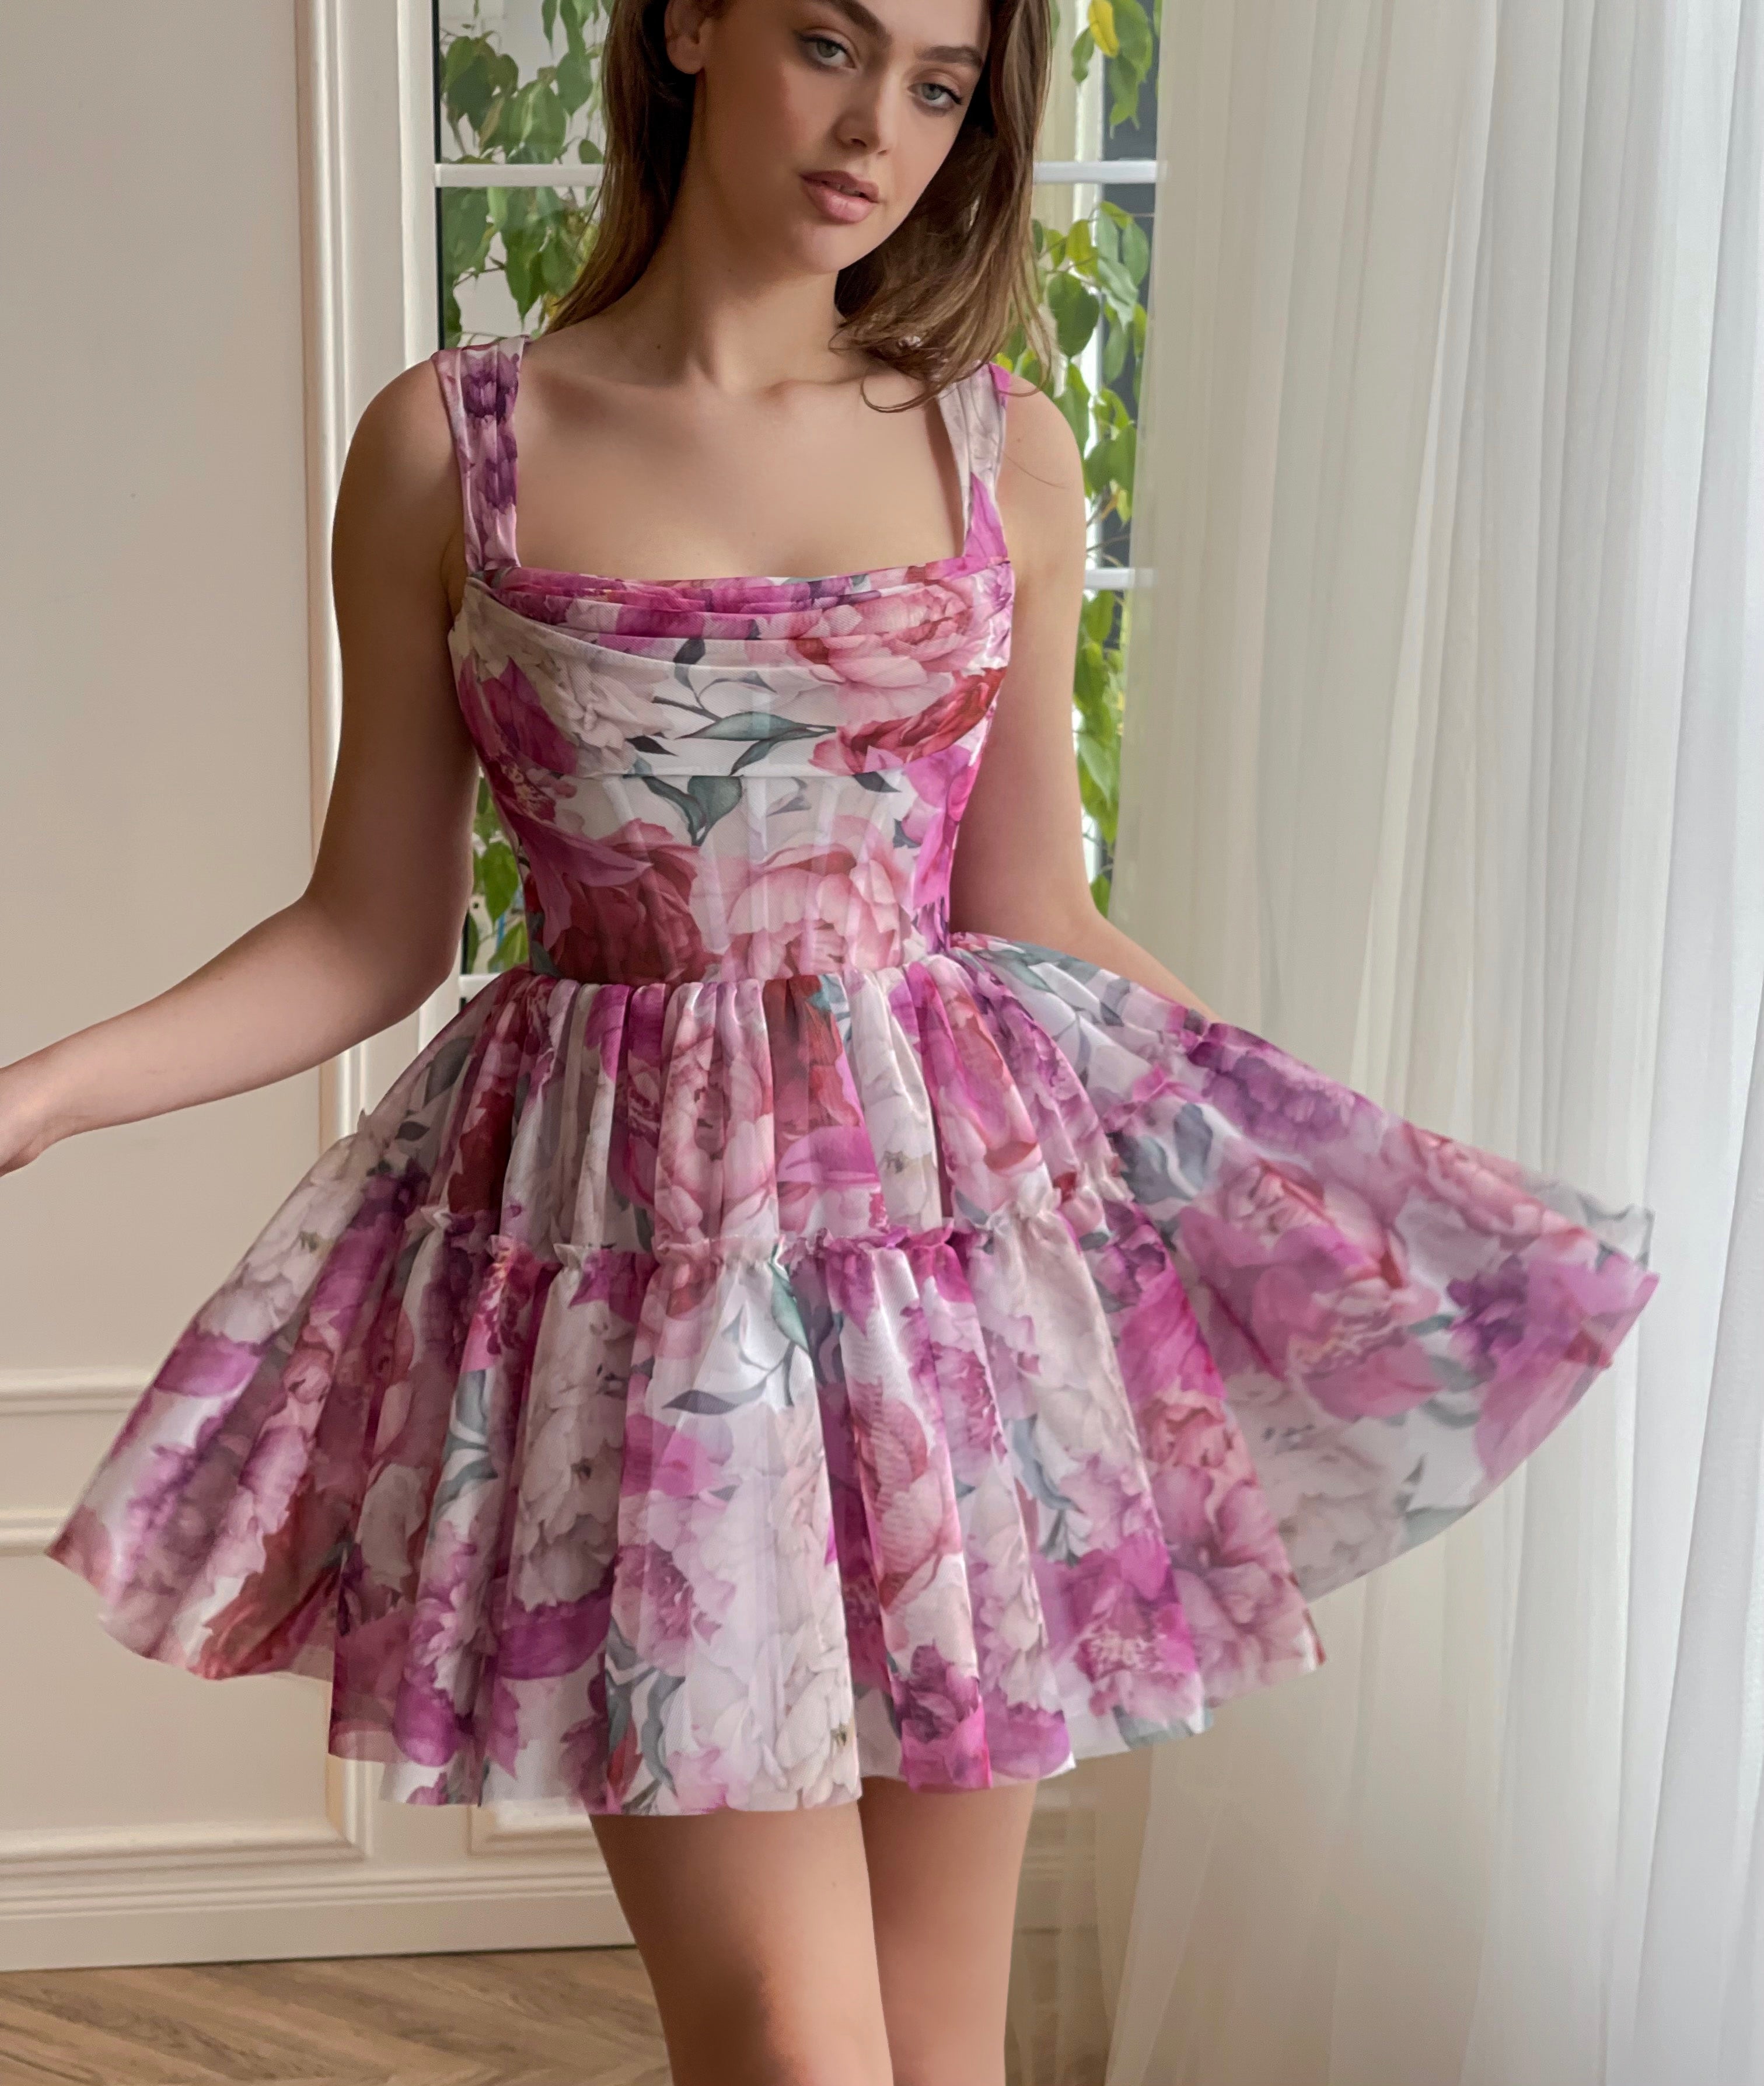 Pink mini dress with printed flowers and straps